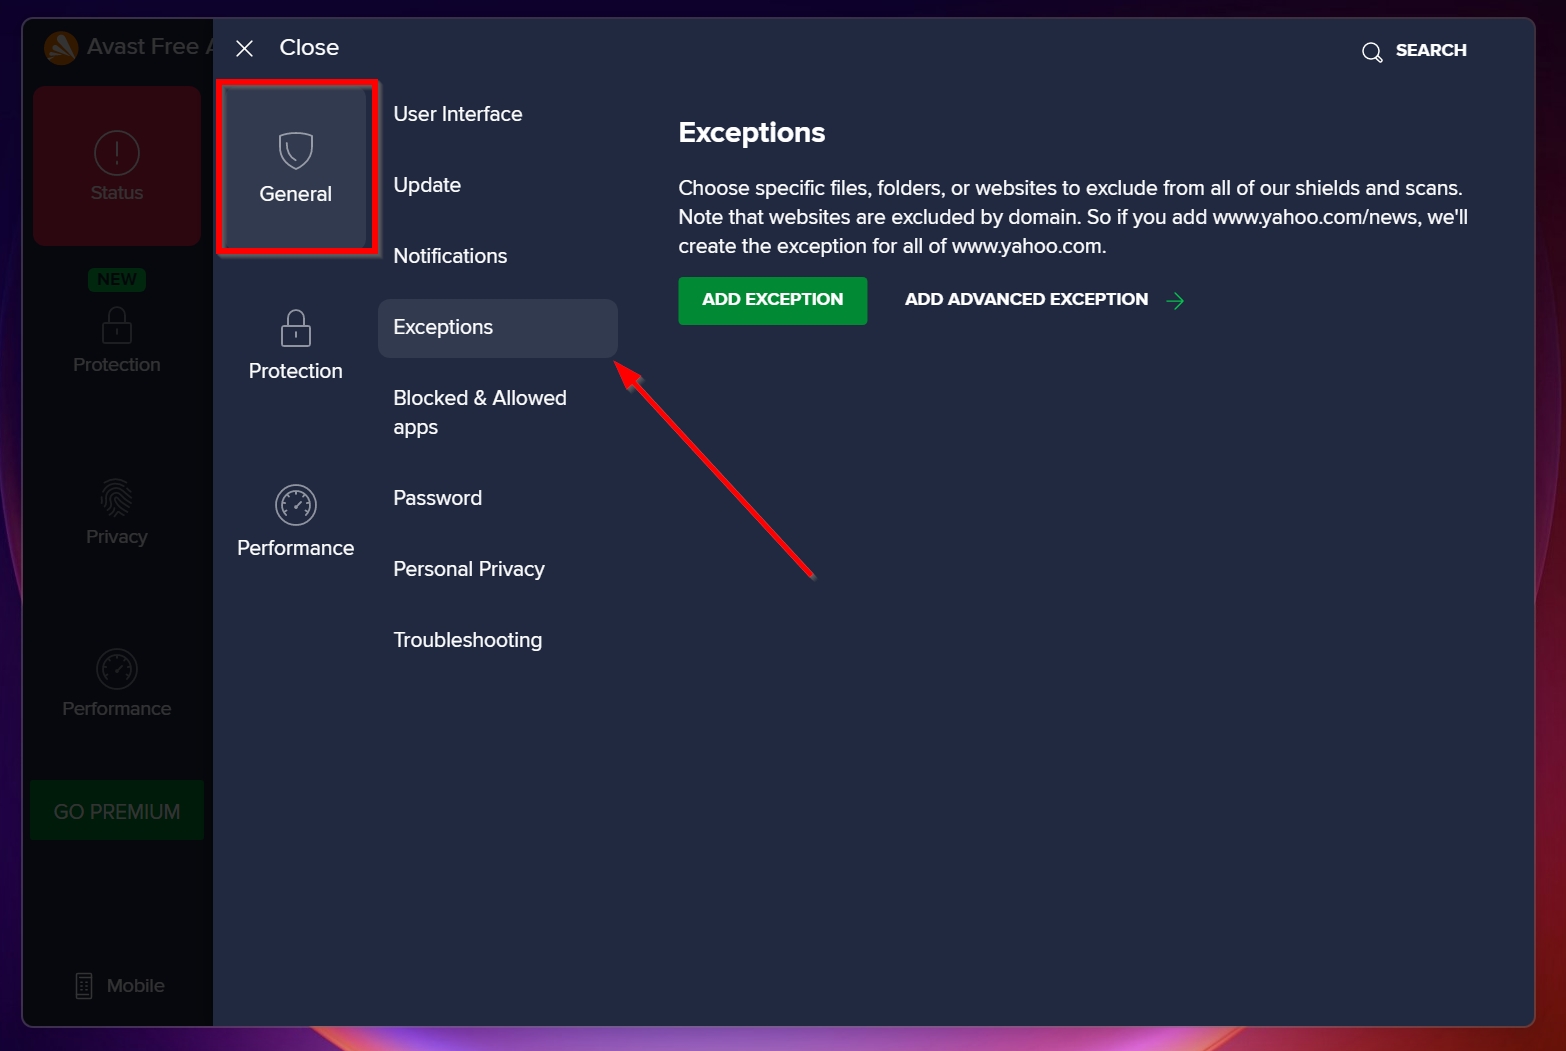 Exceptions option in Avast.